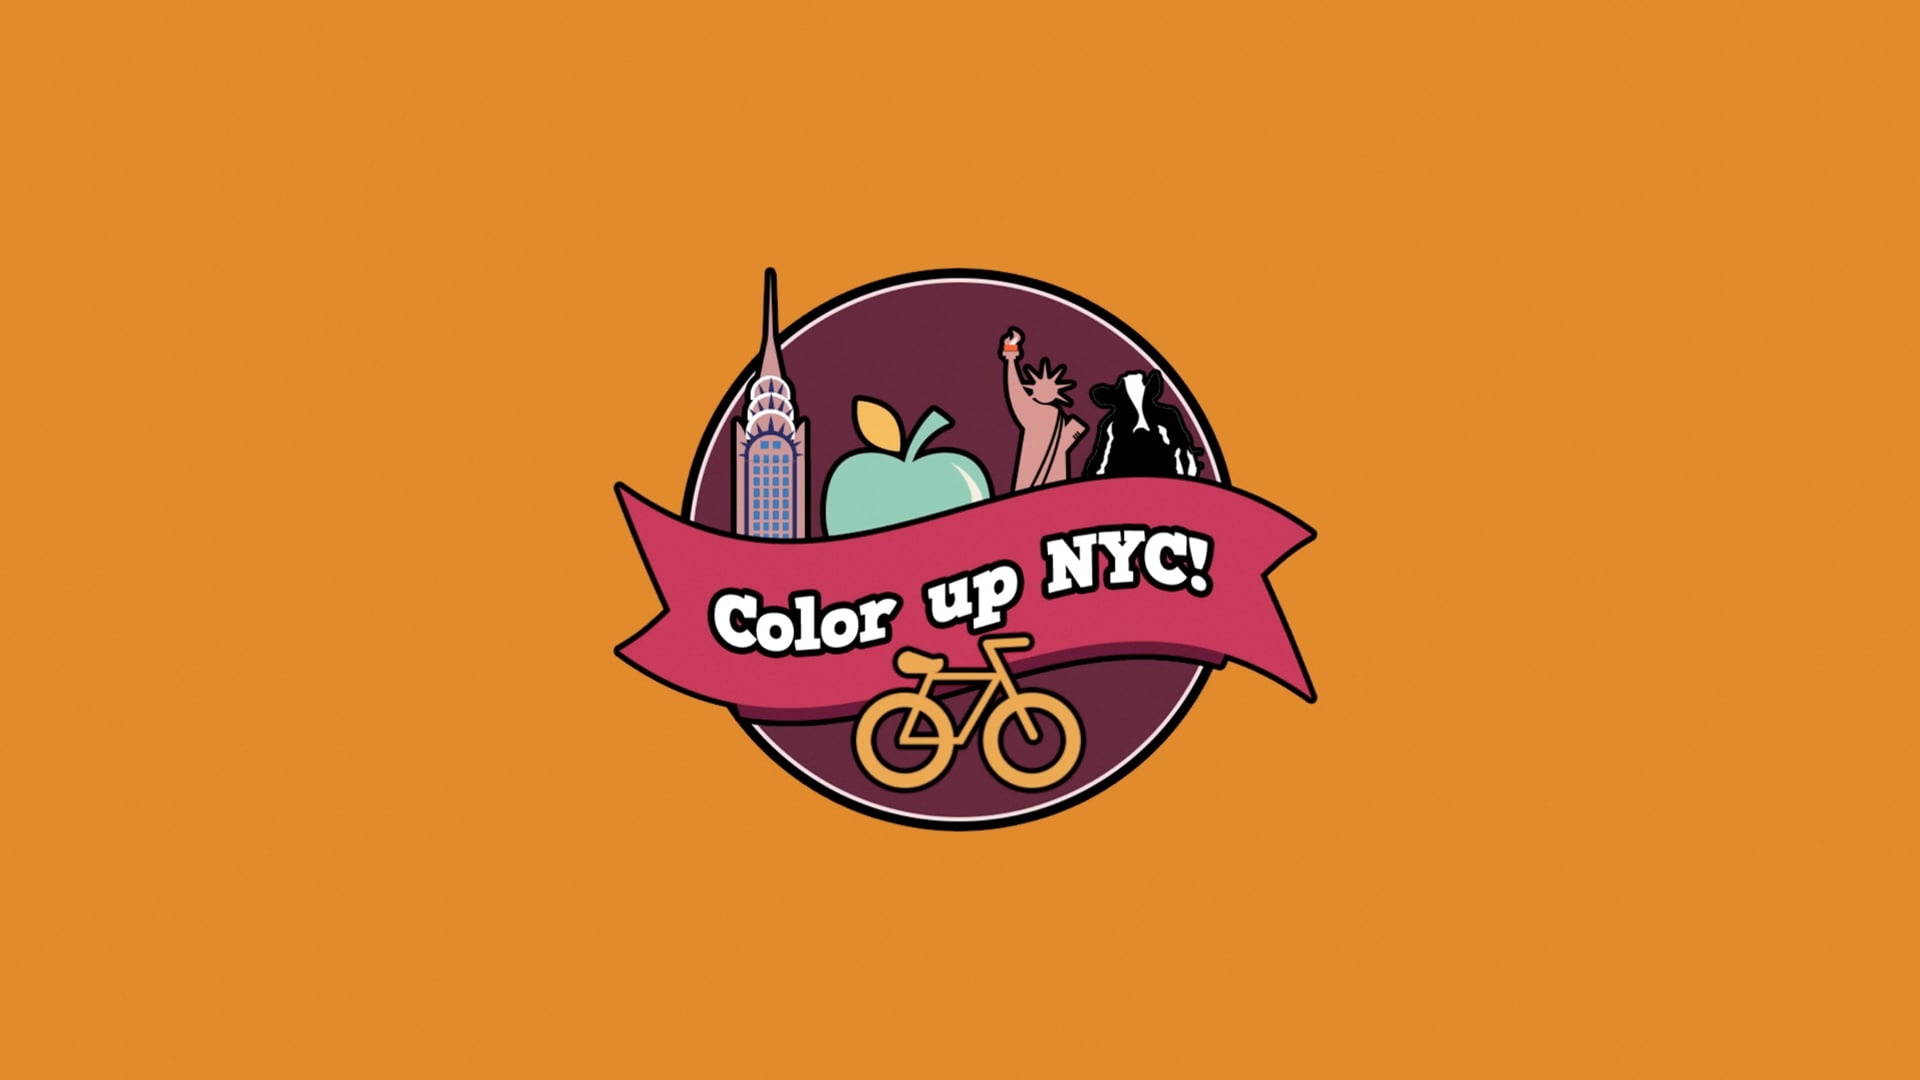 Ben&Jerry's - Color up NYC!